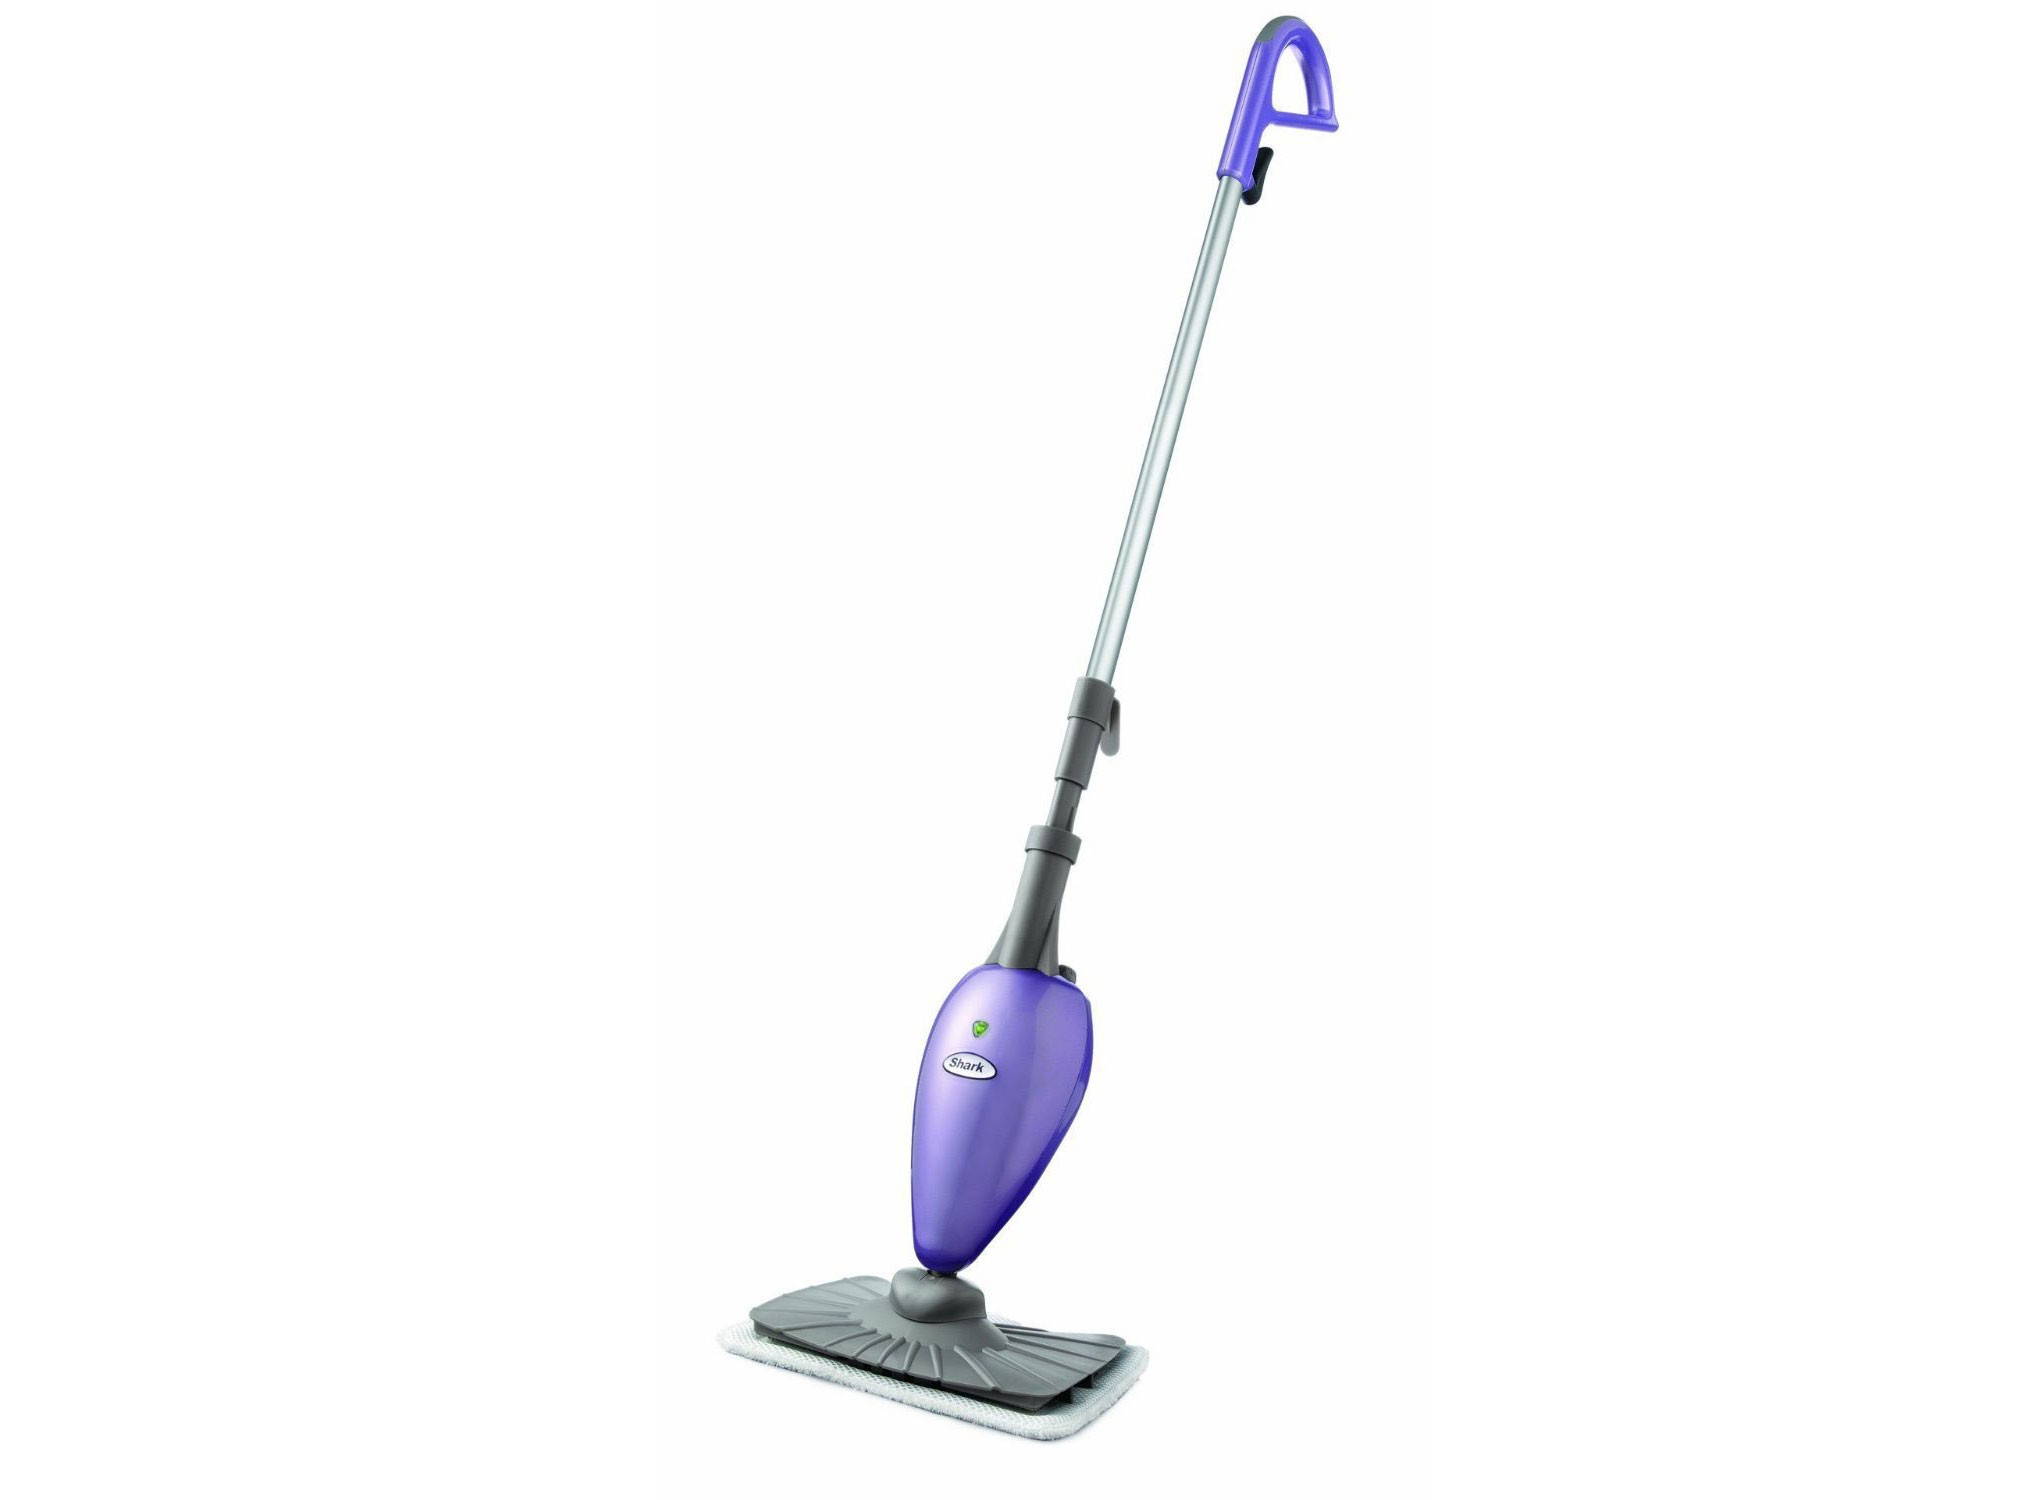 16 Recommended Best Vacuums for Hardwood Floors 2016 2024 free download best vacuums for hardwood floors 2016 of 17 unique shark hardwood floor cleaner photograph dizpos com pertaining to shark hardwood floor cleaner unique the 4 best steam mops pictures of 17 u